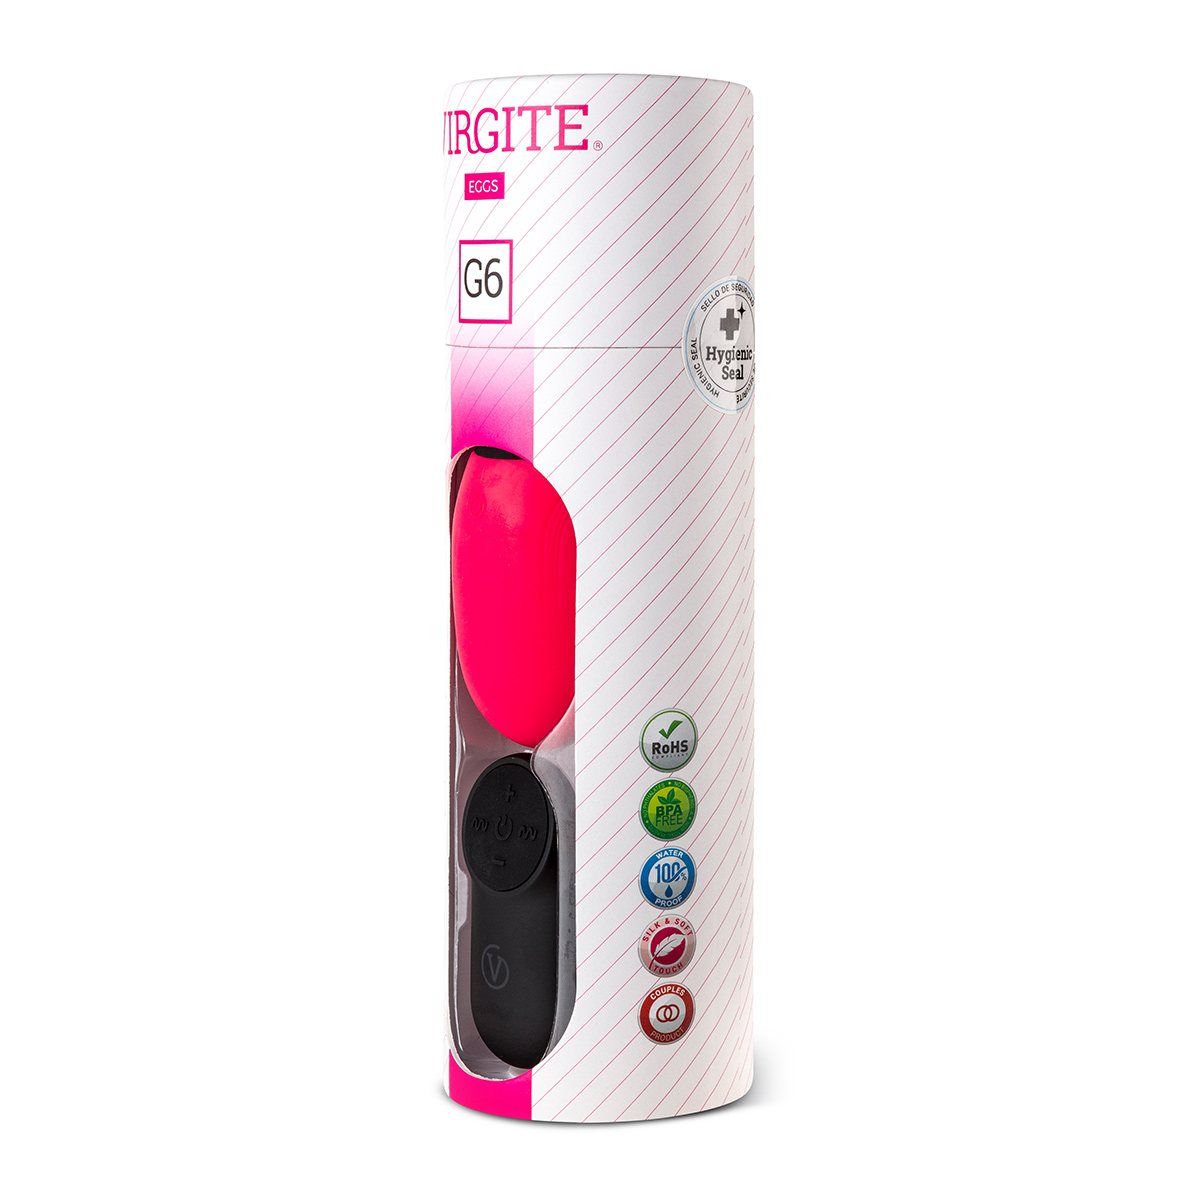 Rechargeable-Remote-Control-Egg-G6-Pink-OPR-3090080-3